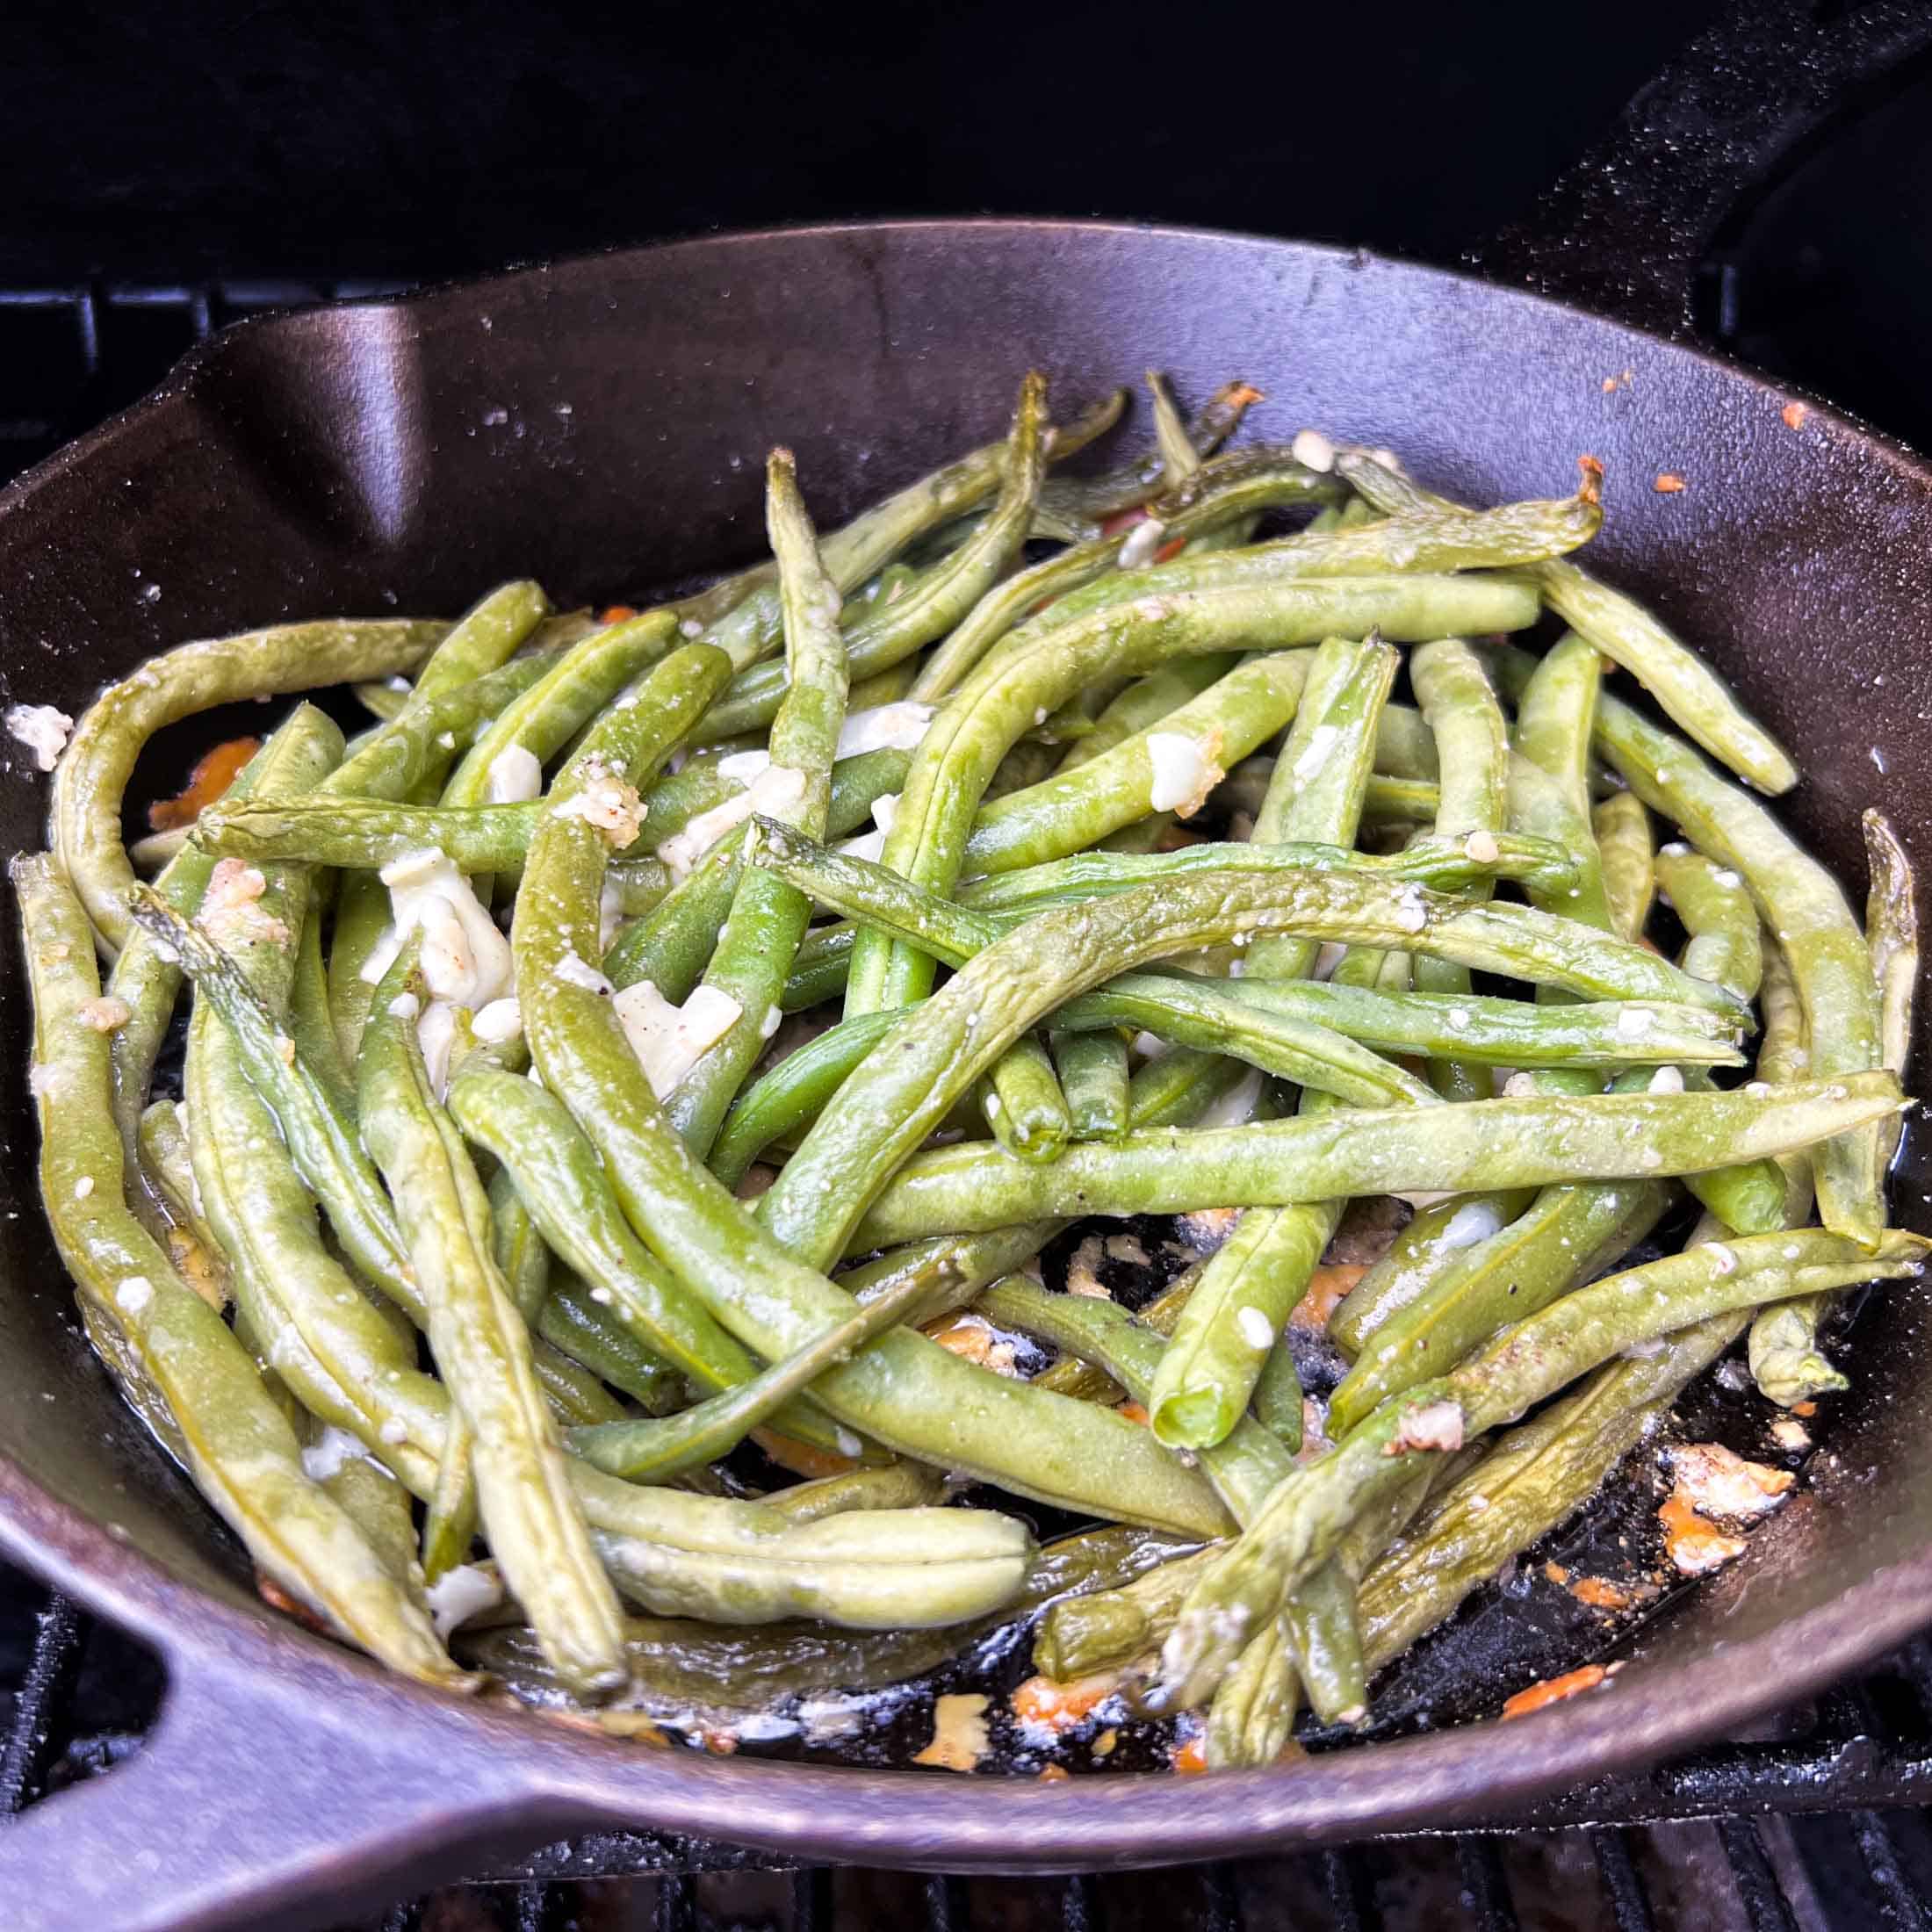 Fully smoked green beans on a cast iron pan showing parmesan flakes.